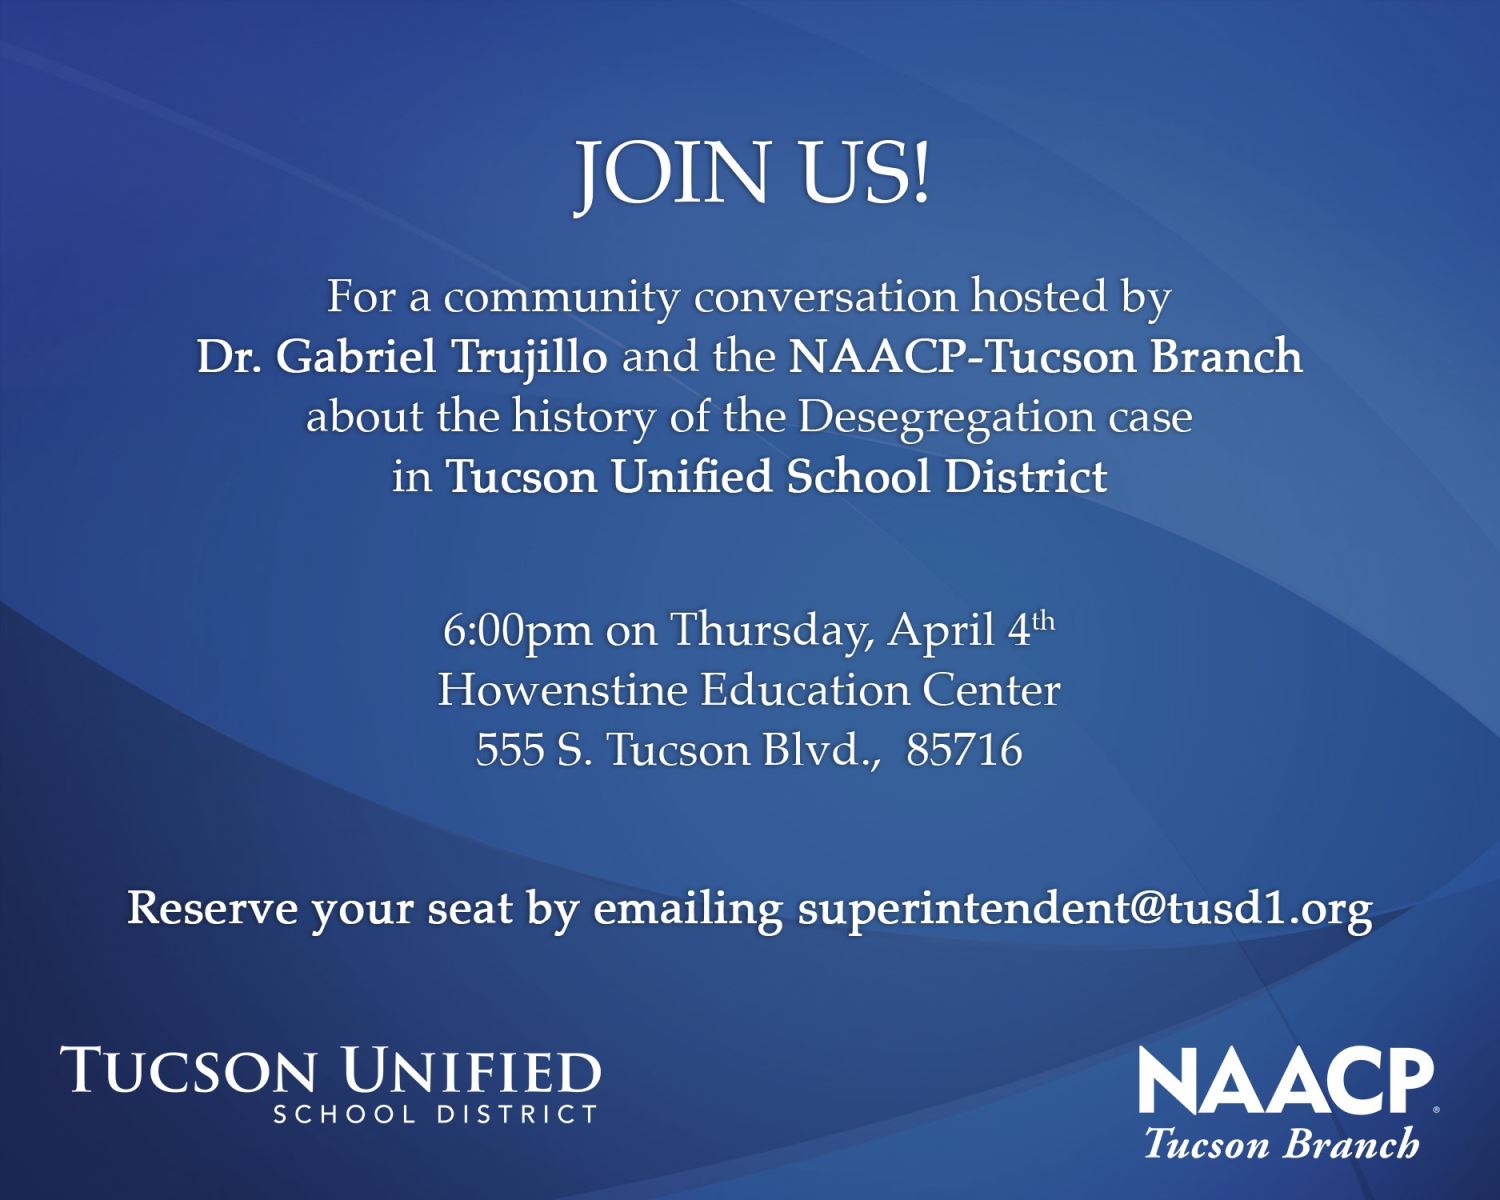 Join us for a community conversation hosted by Dr. Gabriel Trujillo and the NAACP-Tucson Branch about the history of the Desegregation case in Ƶ Thursday, April 4 | 6 pm | Howenstine Education Center | 555 S. Tucson Blvd., 85716  Reserve your seat by email.